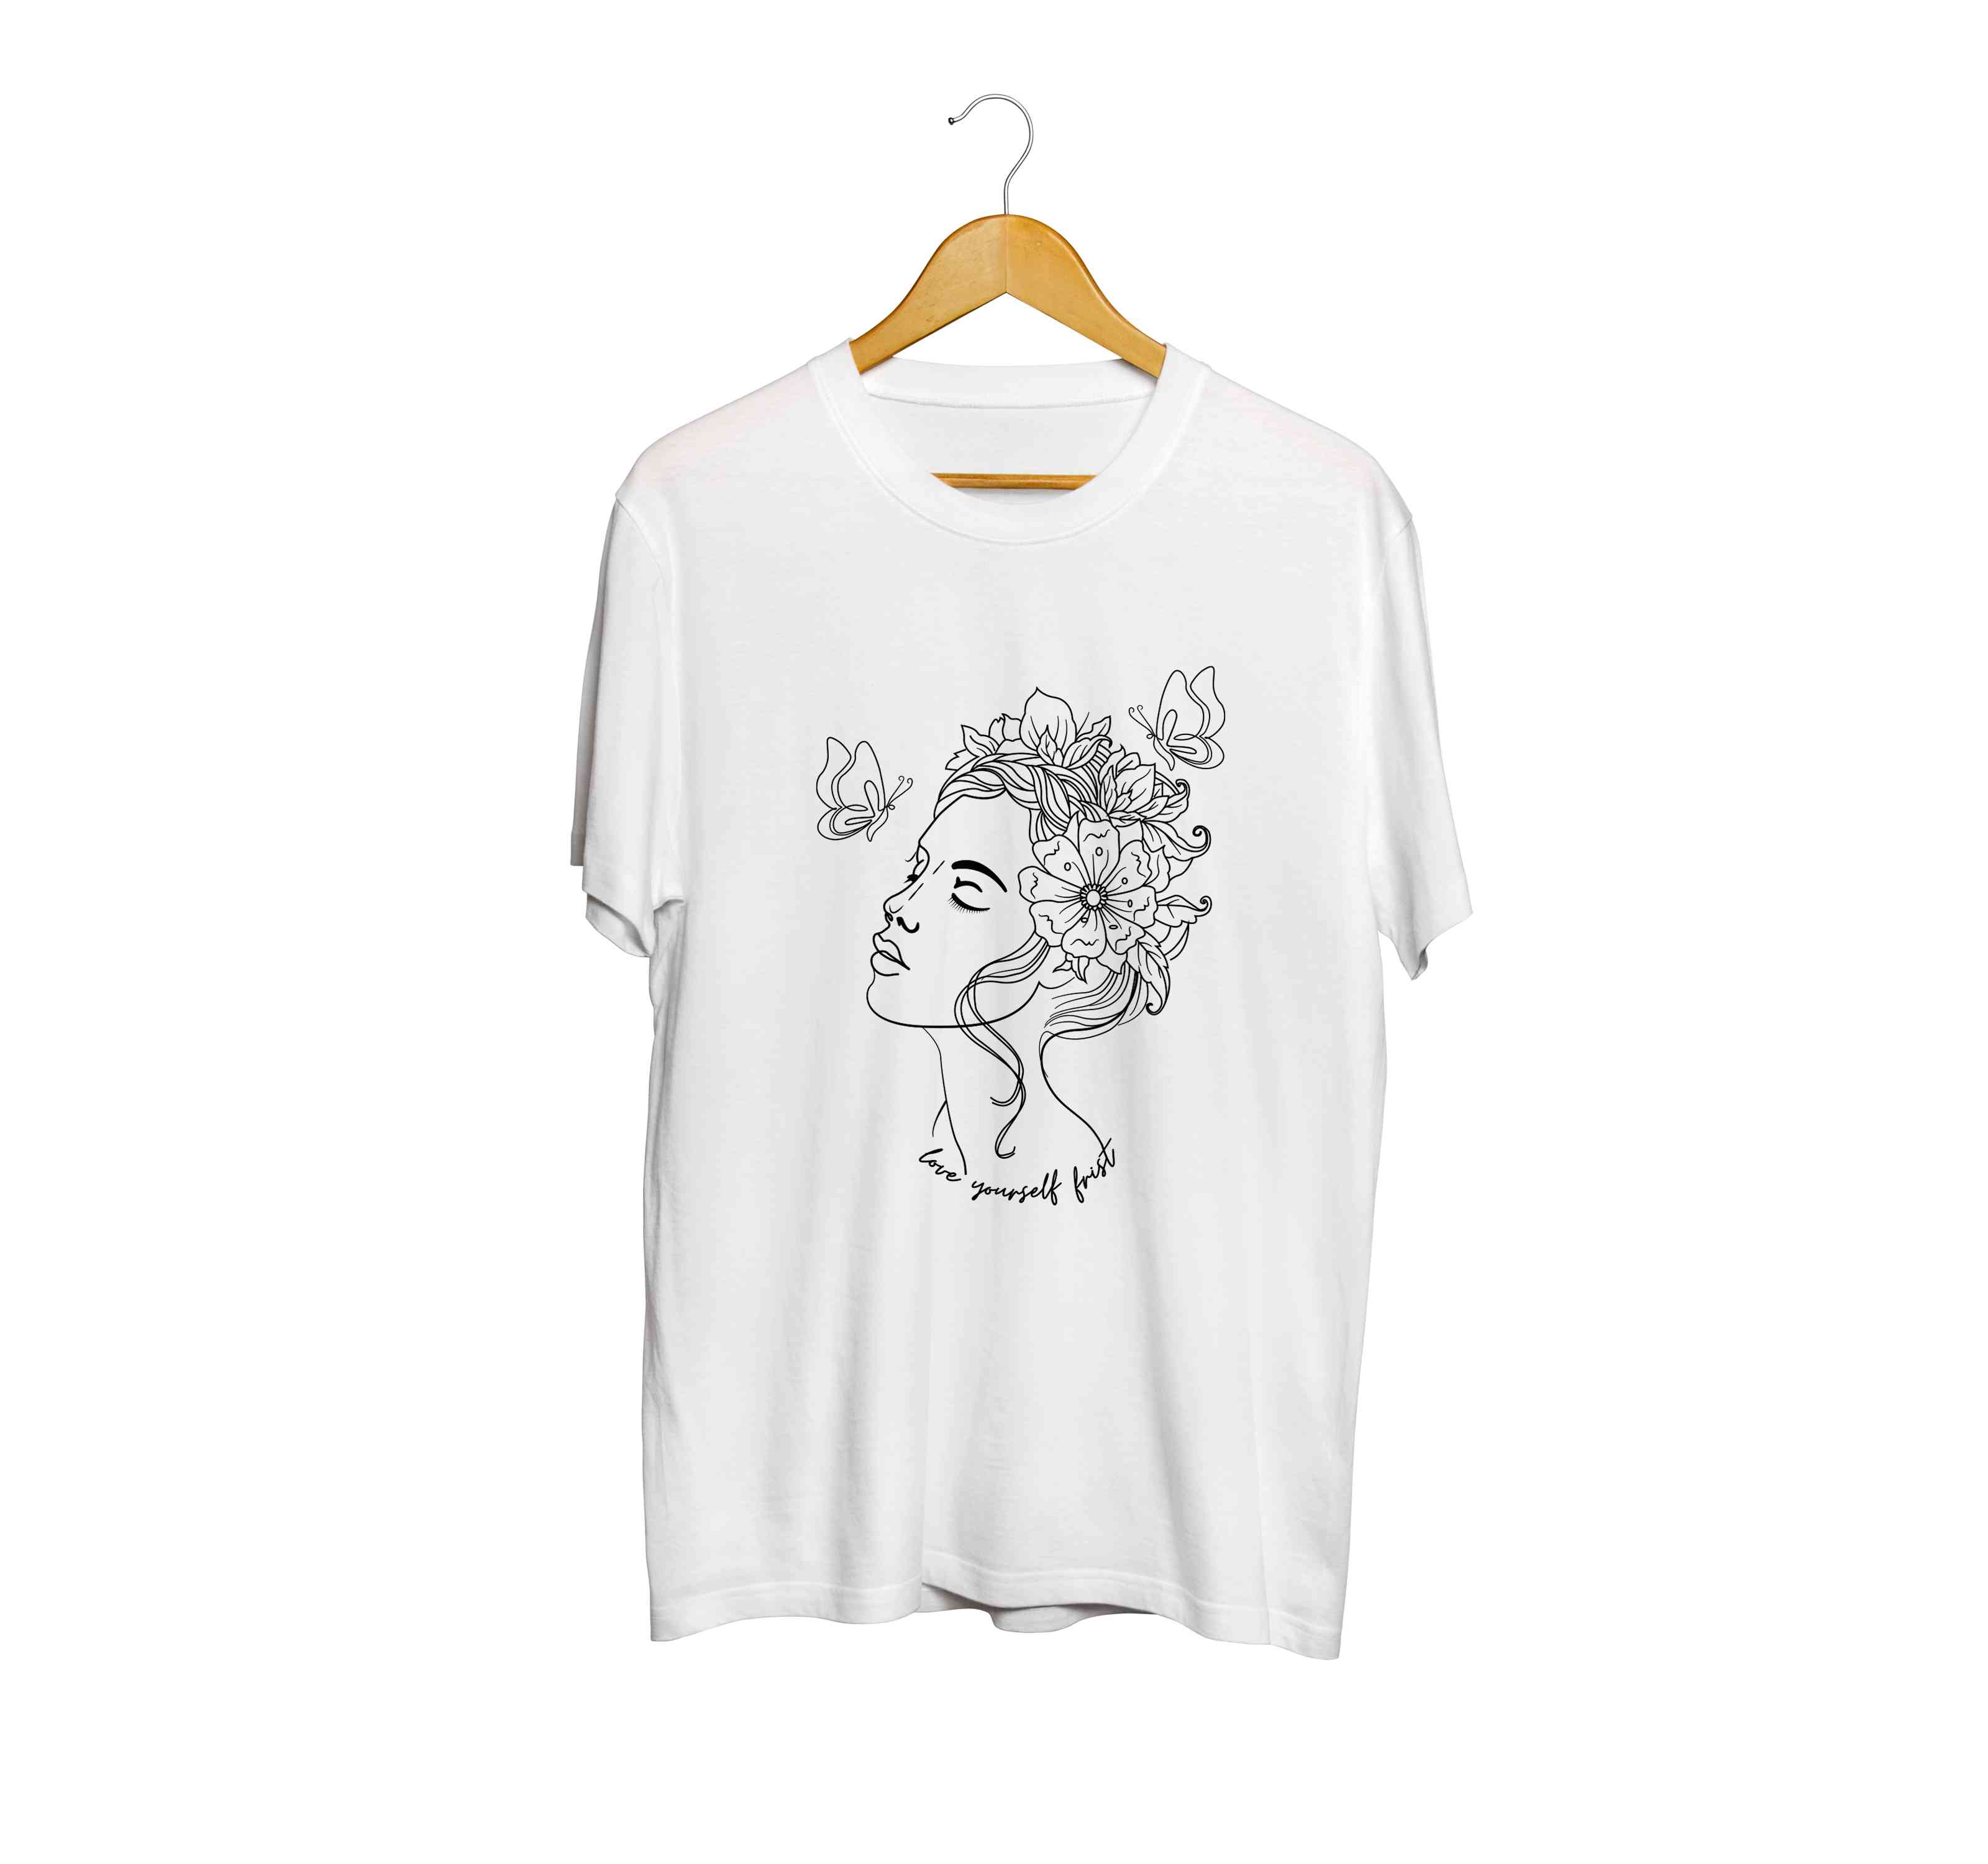 Let's create t shirt design with amazing line art style